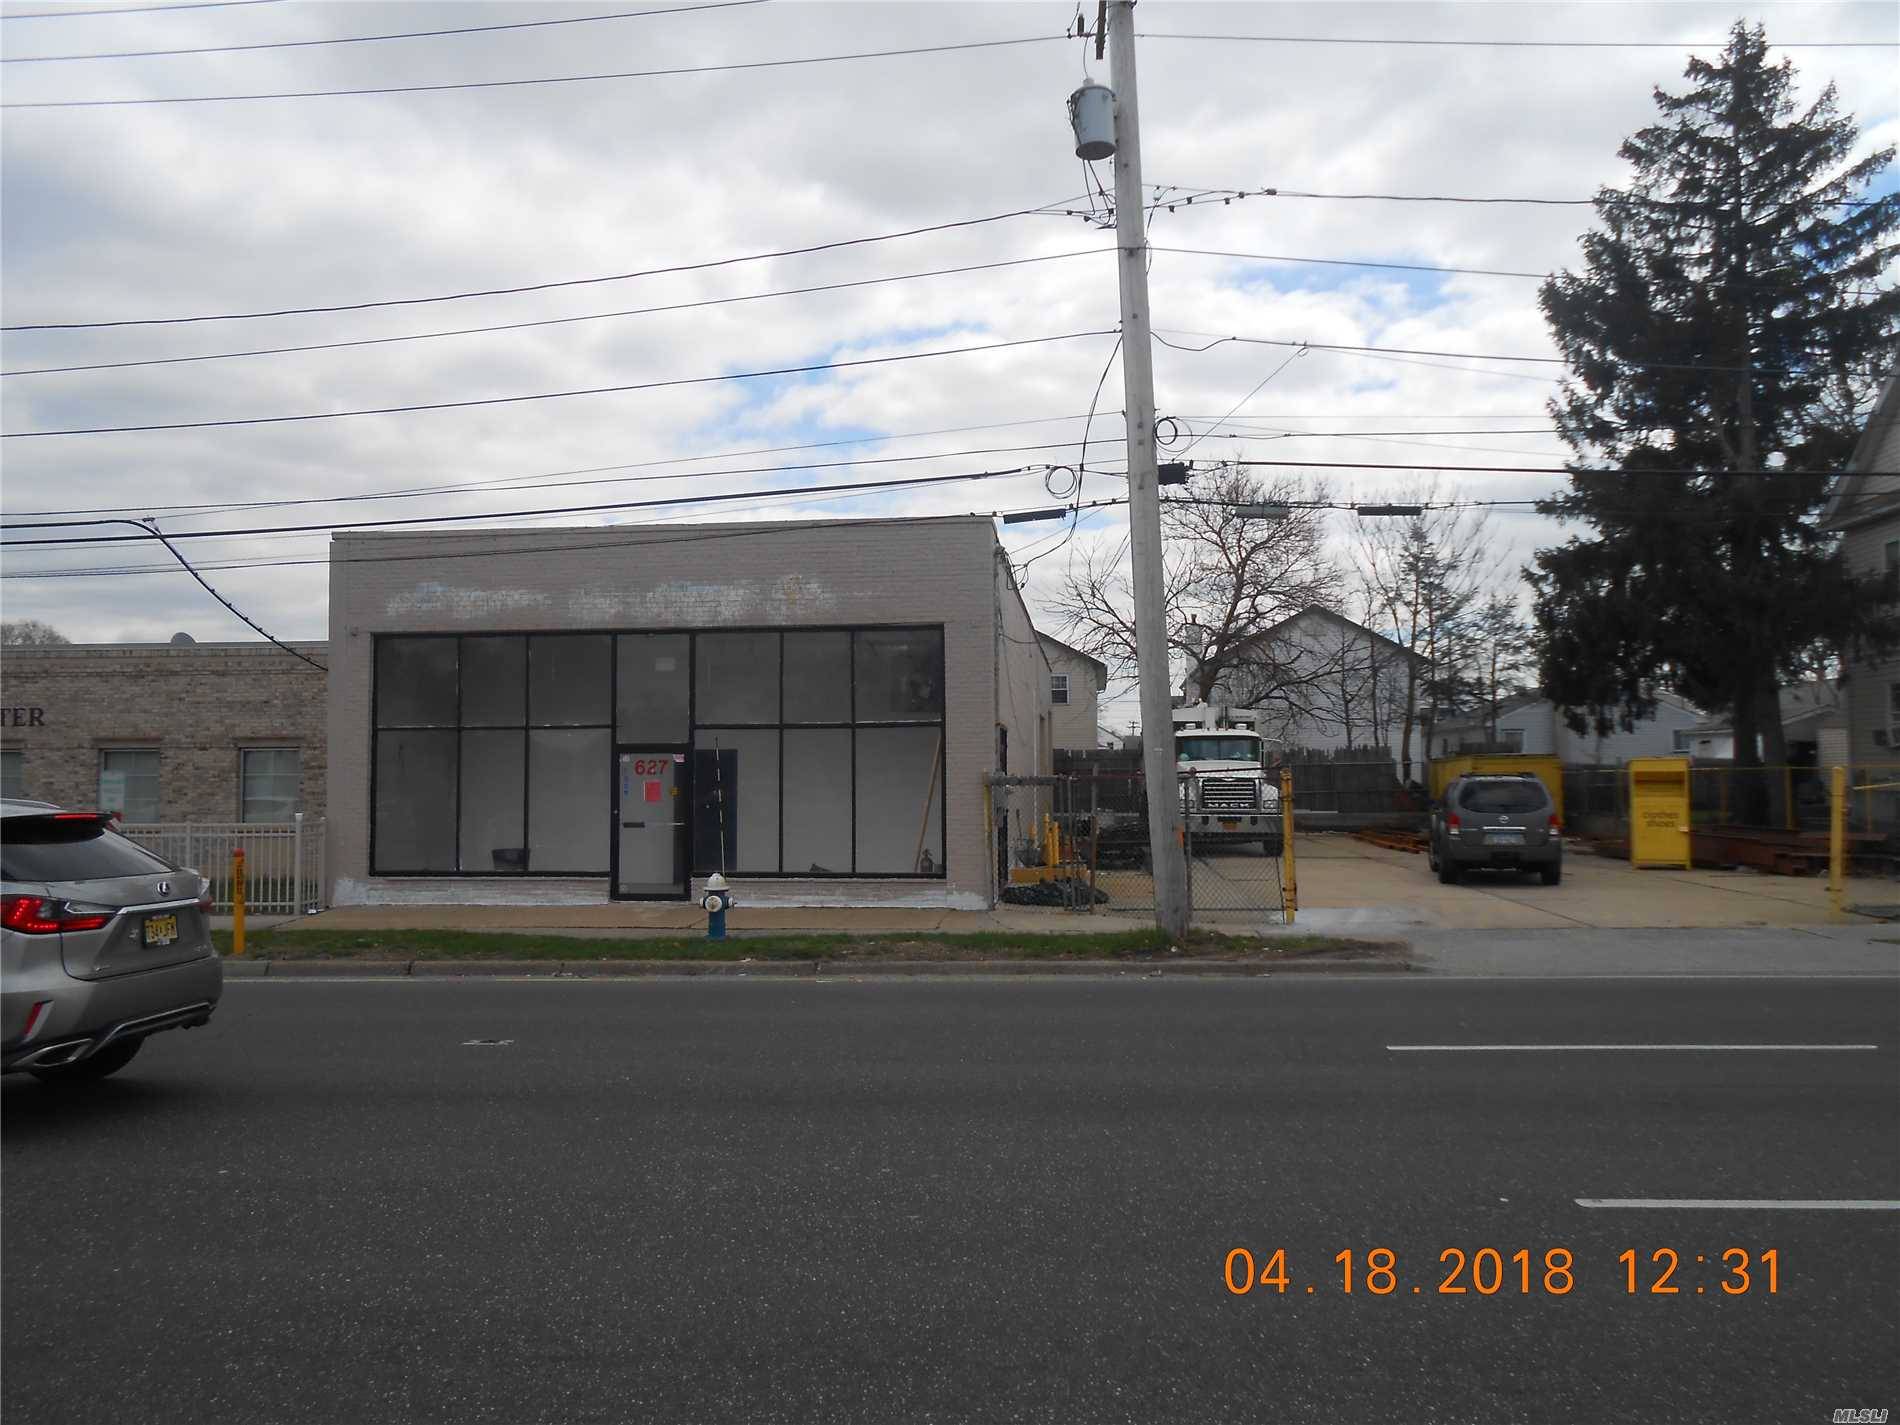 Retail building, 2, 700 sq ft showroom building w warehouse, plus 4, 000 sq ft parking lot included, Zoned Class B, Great for user requiring high exposure, 80 x100 property, ...